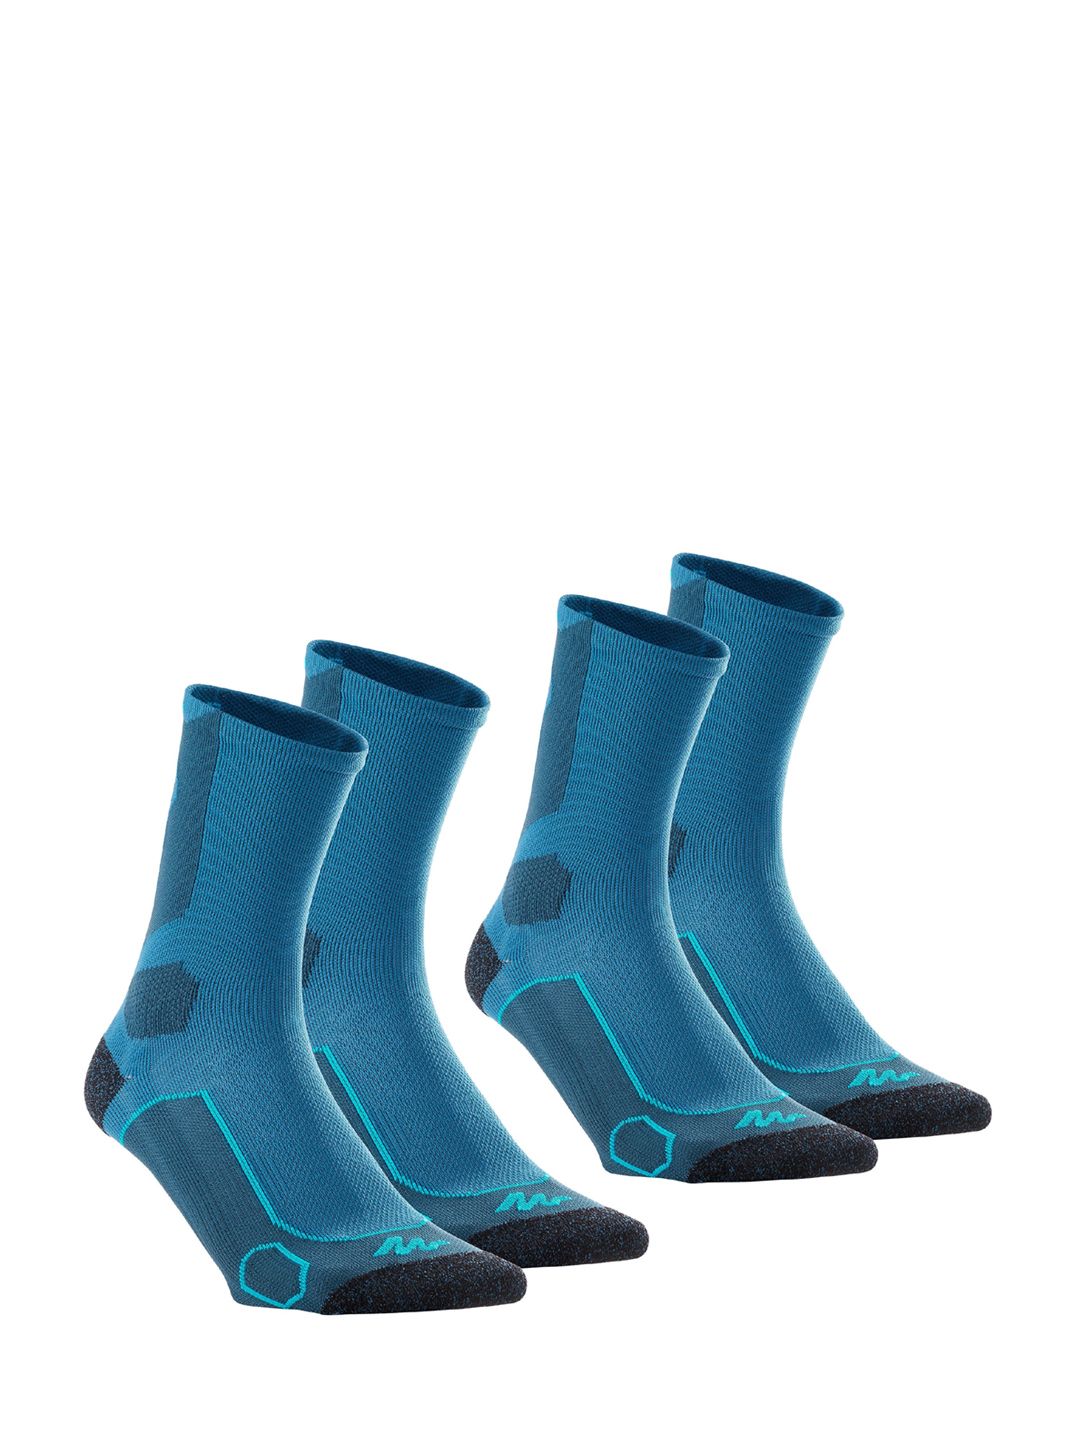 Quechua By Decathlon Pack Of 2 Navy Blue & Black Patterned Calf-Length Hiking Socks Price in India